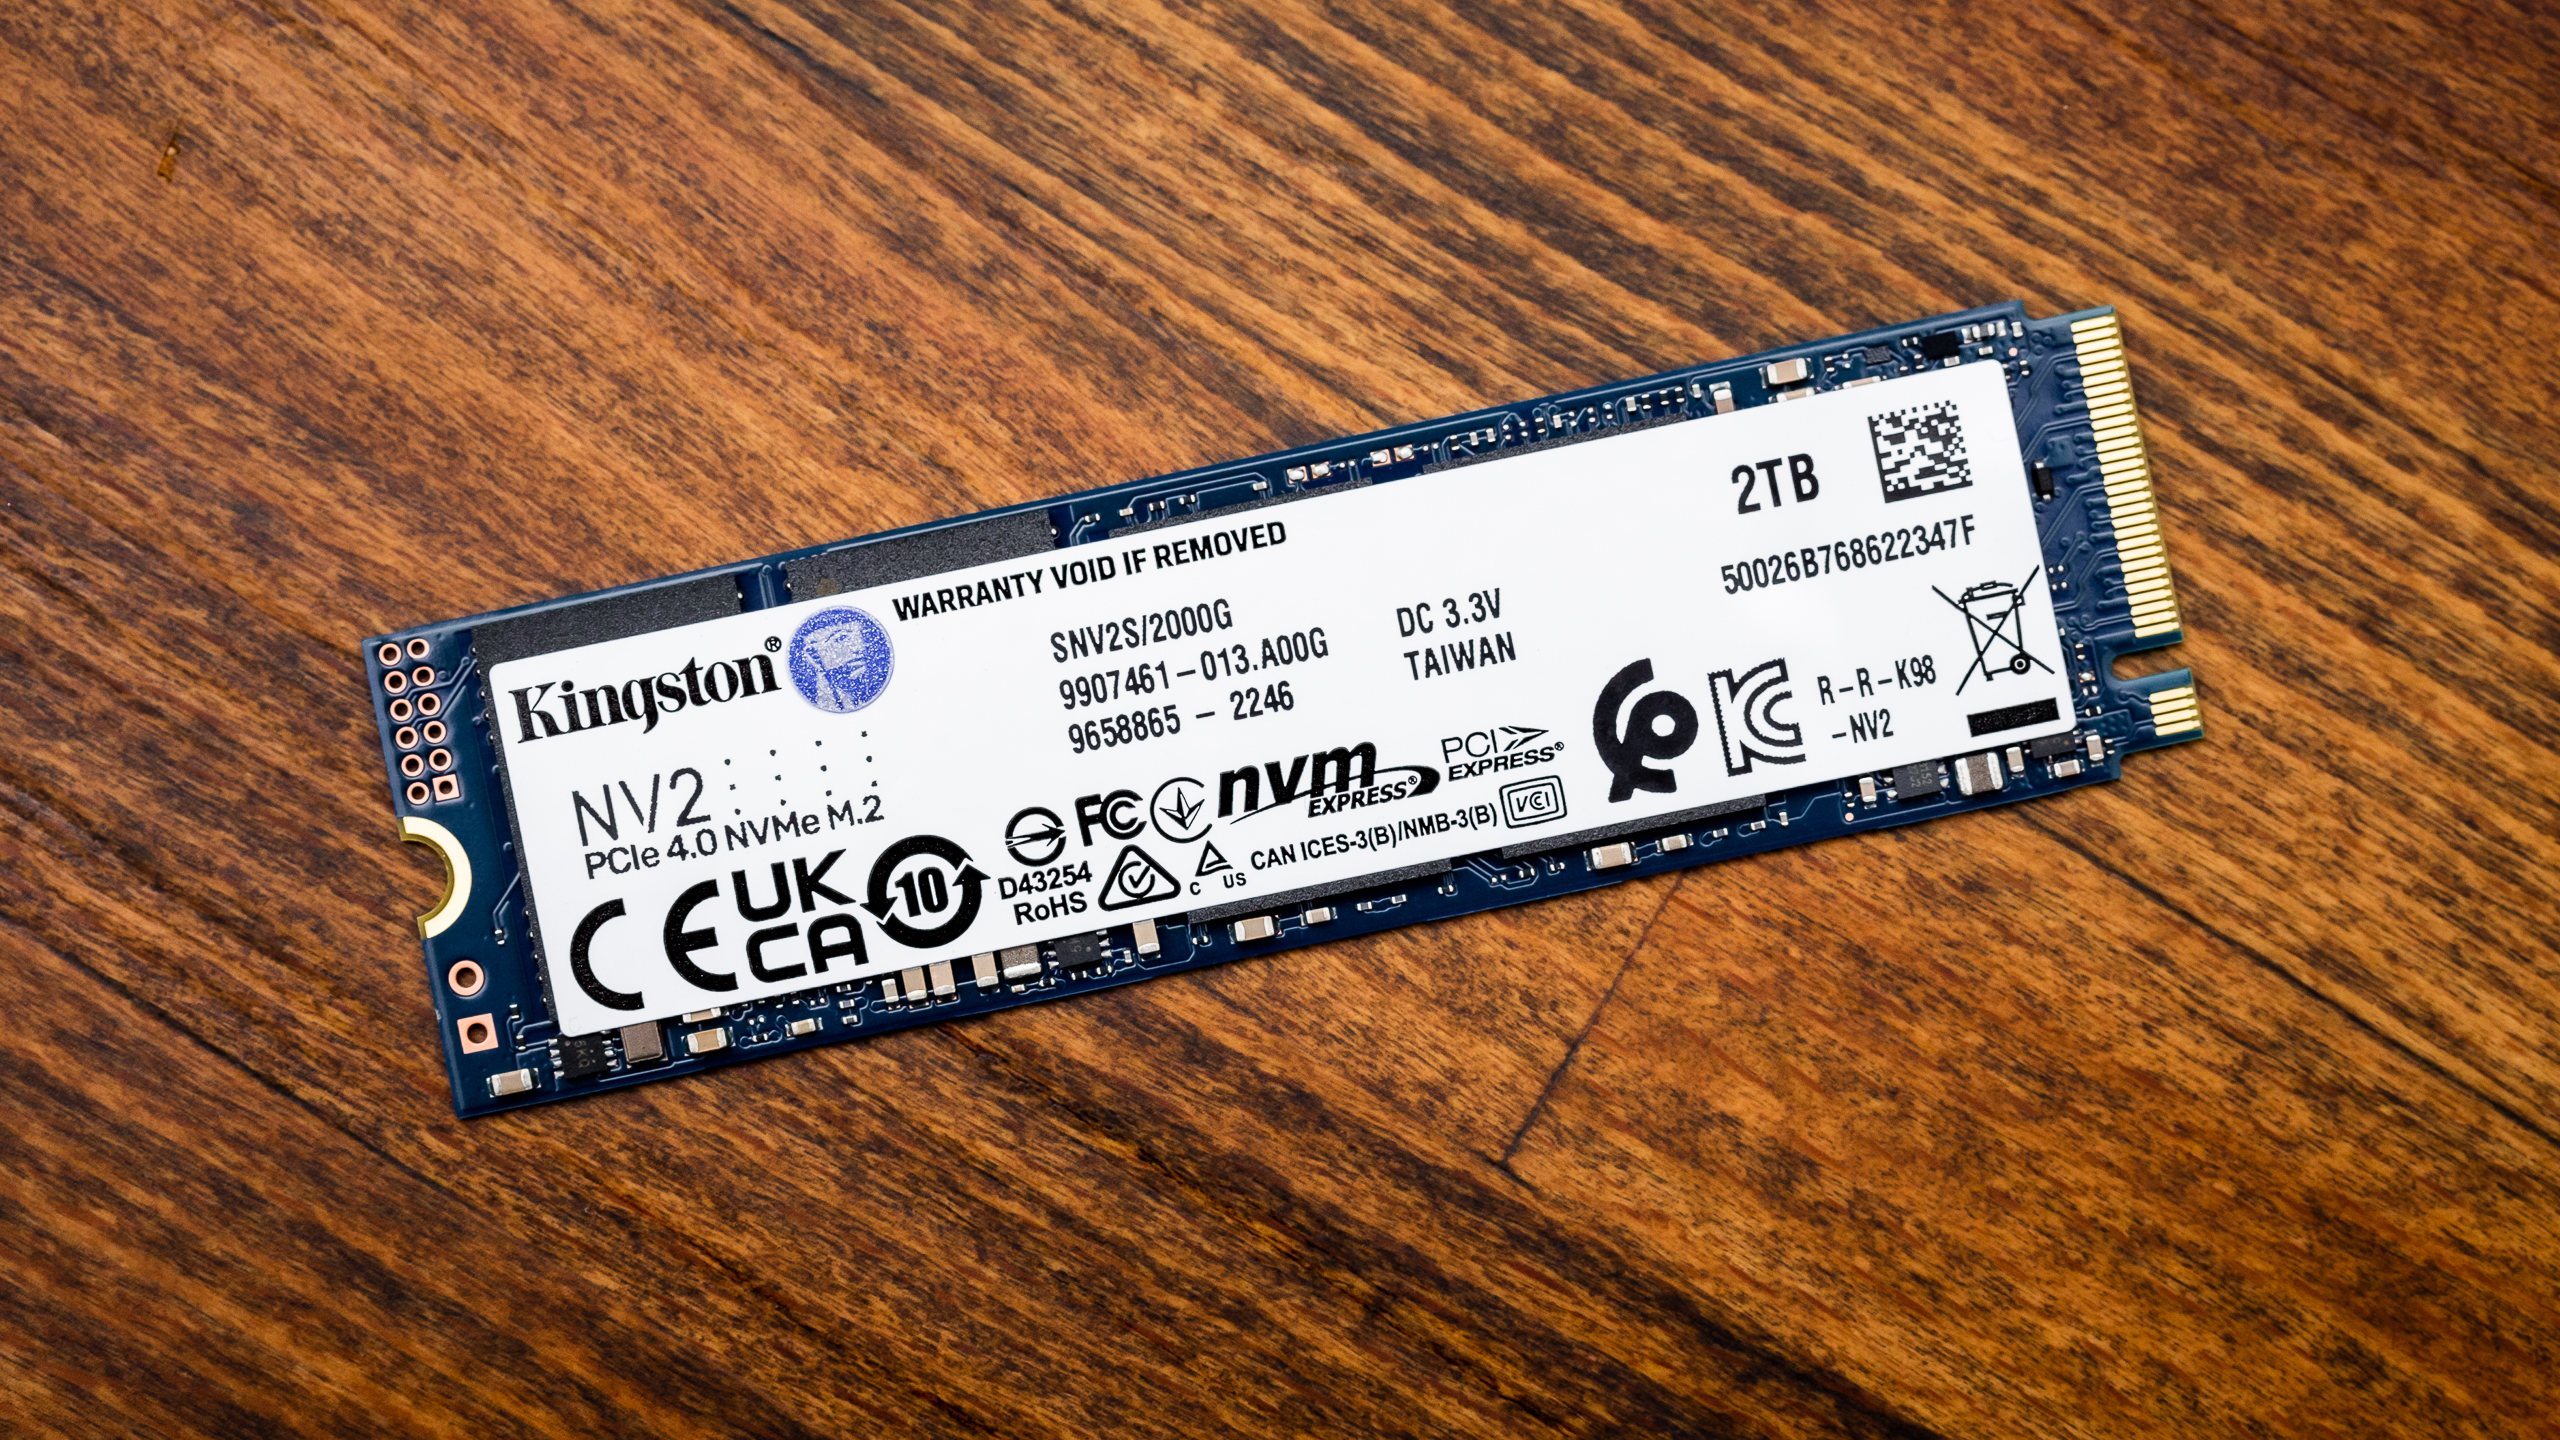 Hands-on review: Kingston 2TB NV2 PCIe 4.0 NVMe M.2 SSD